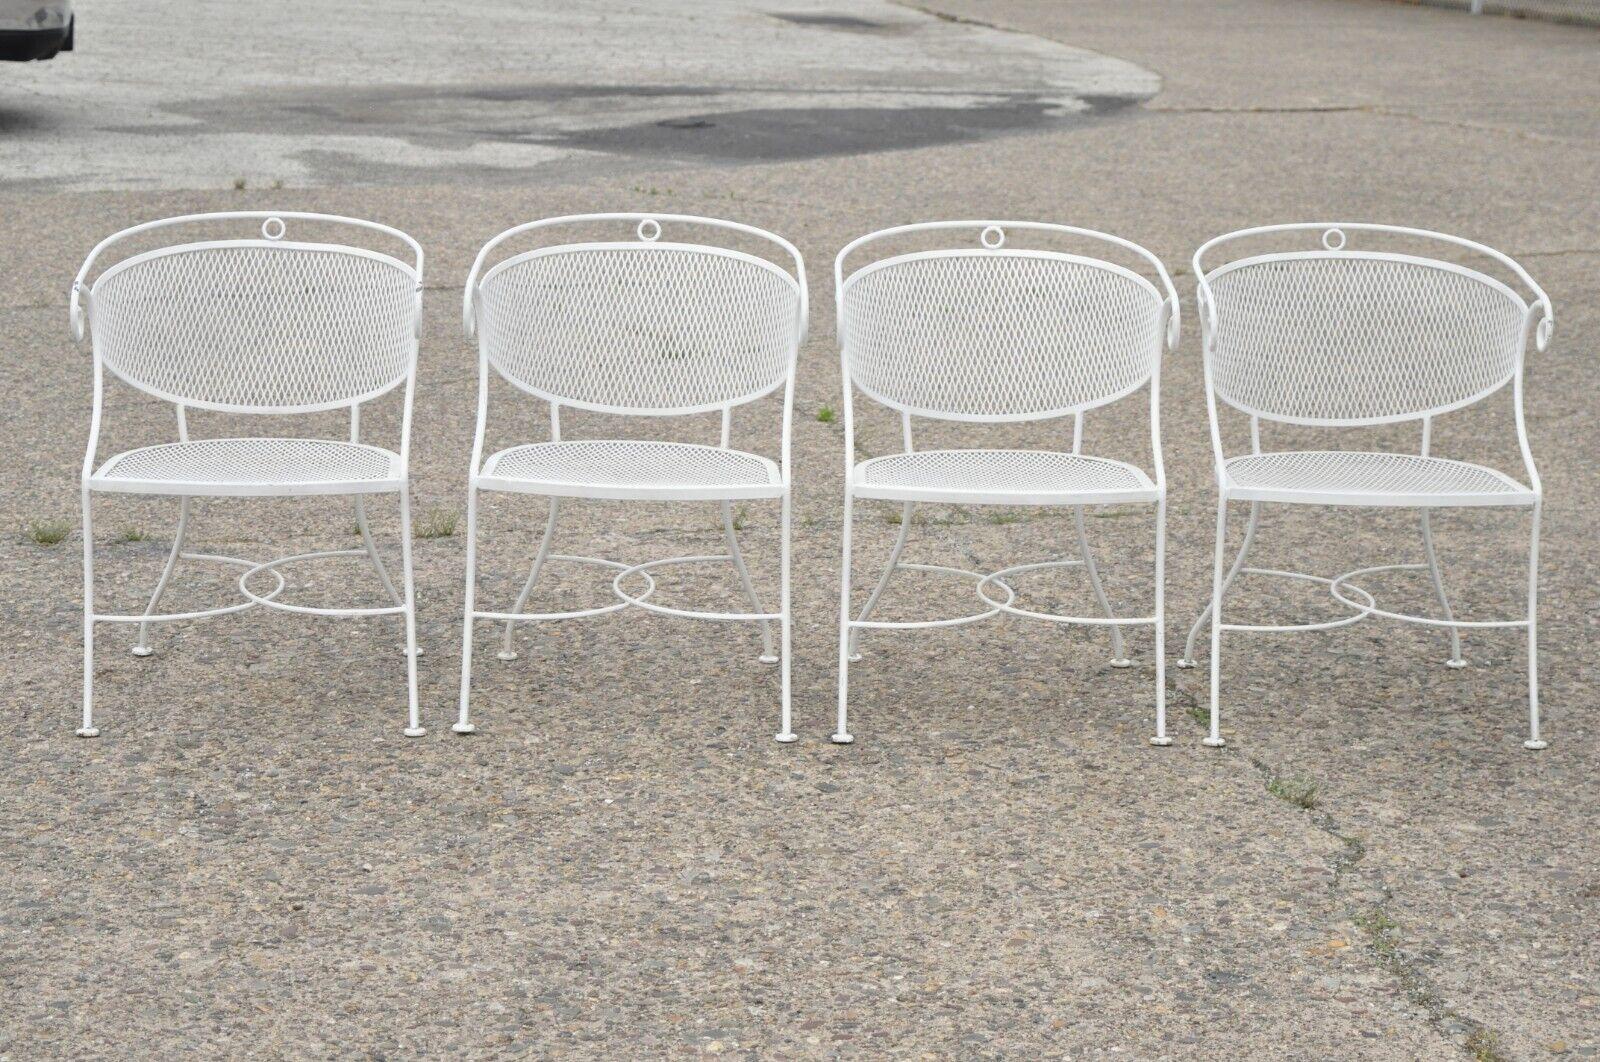 Vintage Hollywood Regency Scrolling Wrought Iron Barrel Back Chairs, Set of 4 For Sale 6